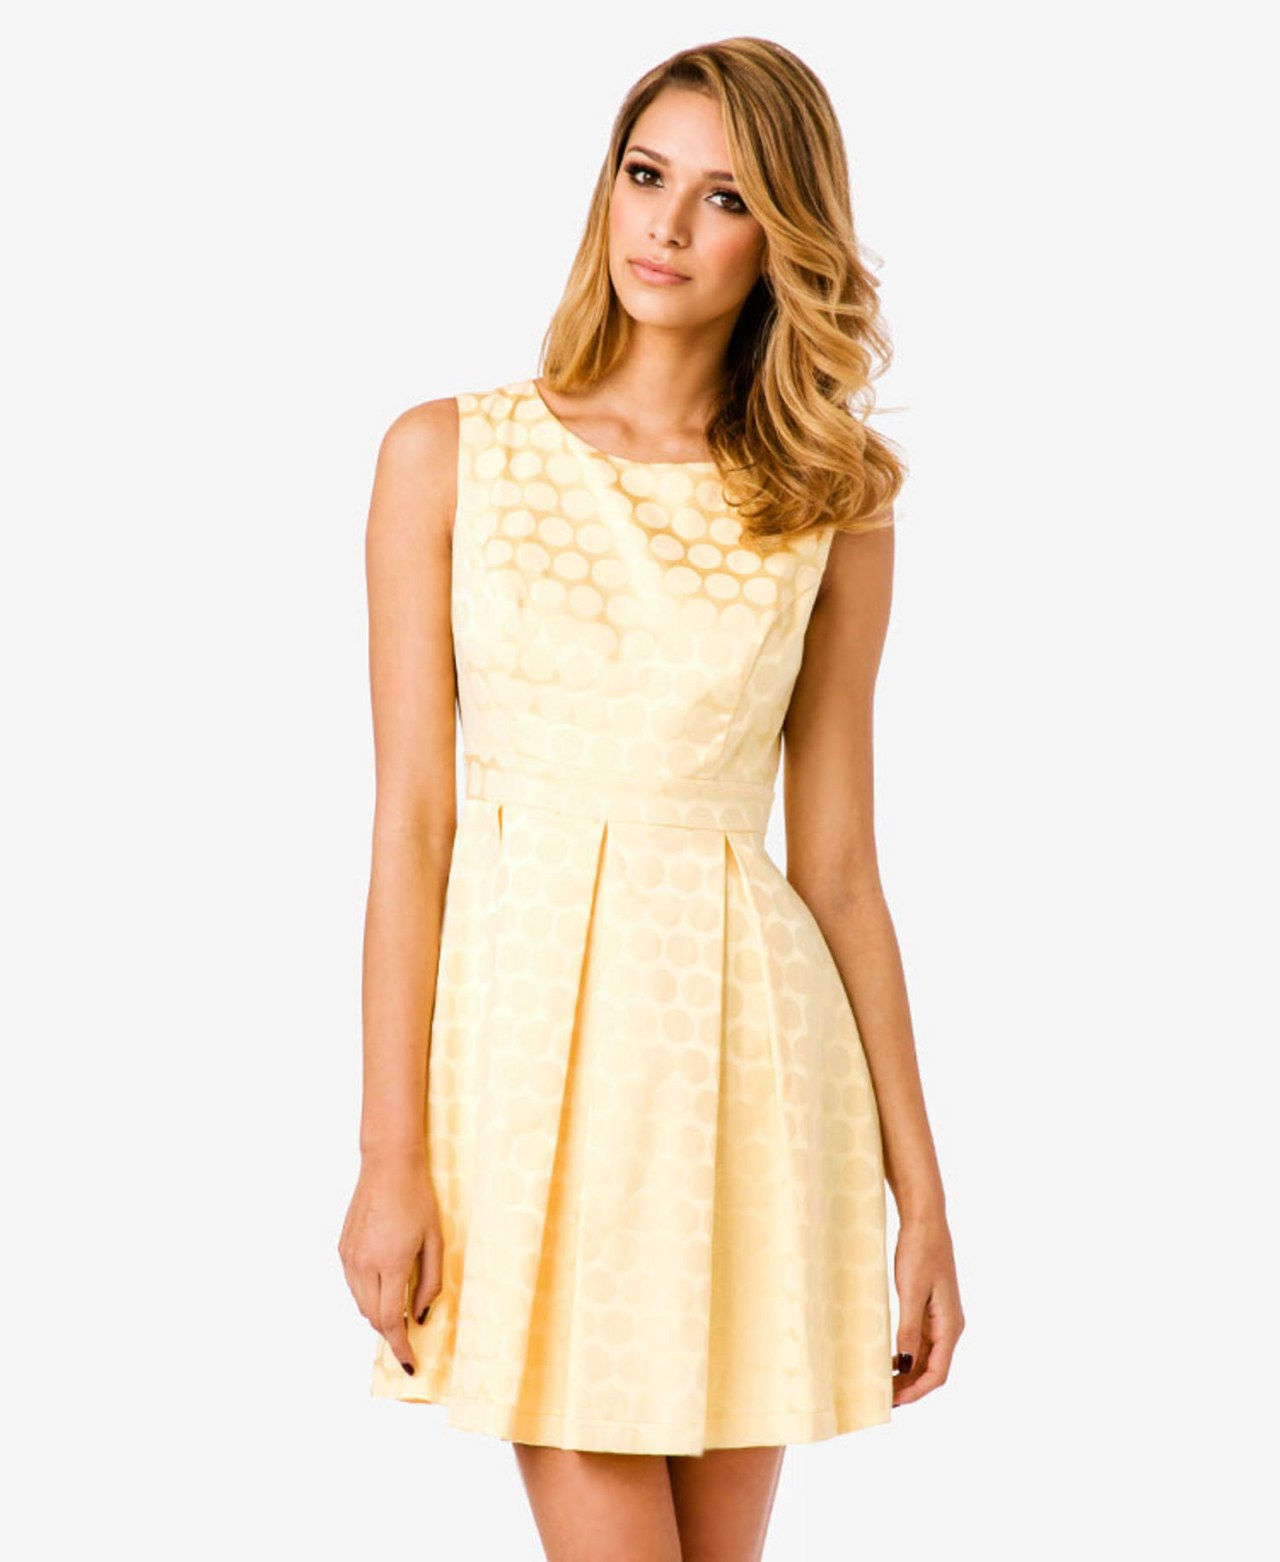 Pastel dresses fit and flare dotted dress fa